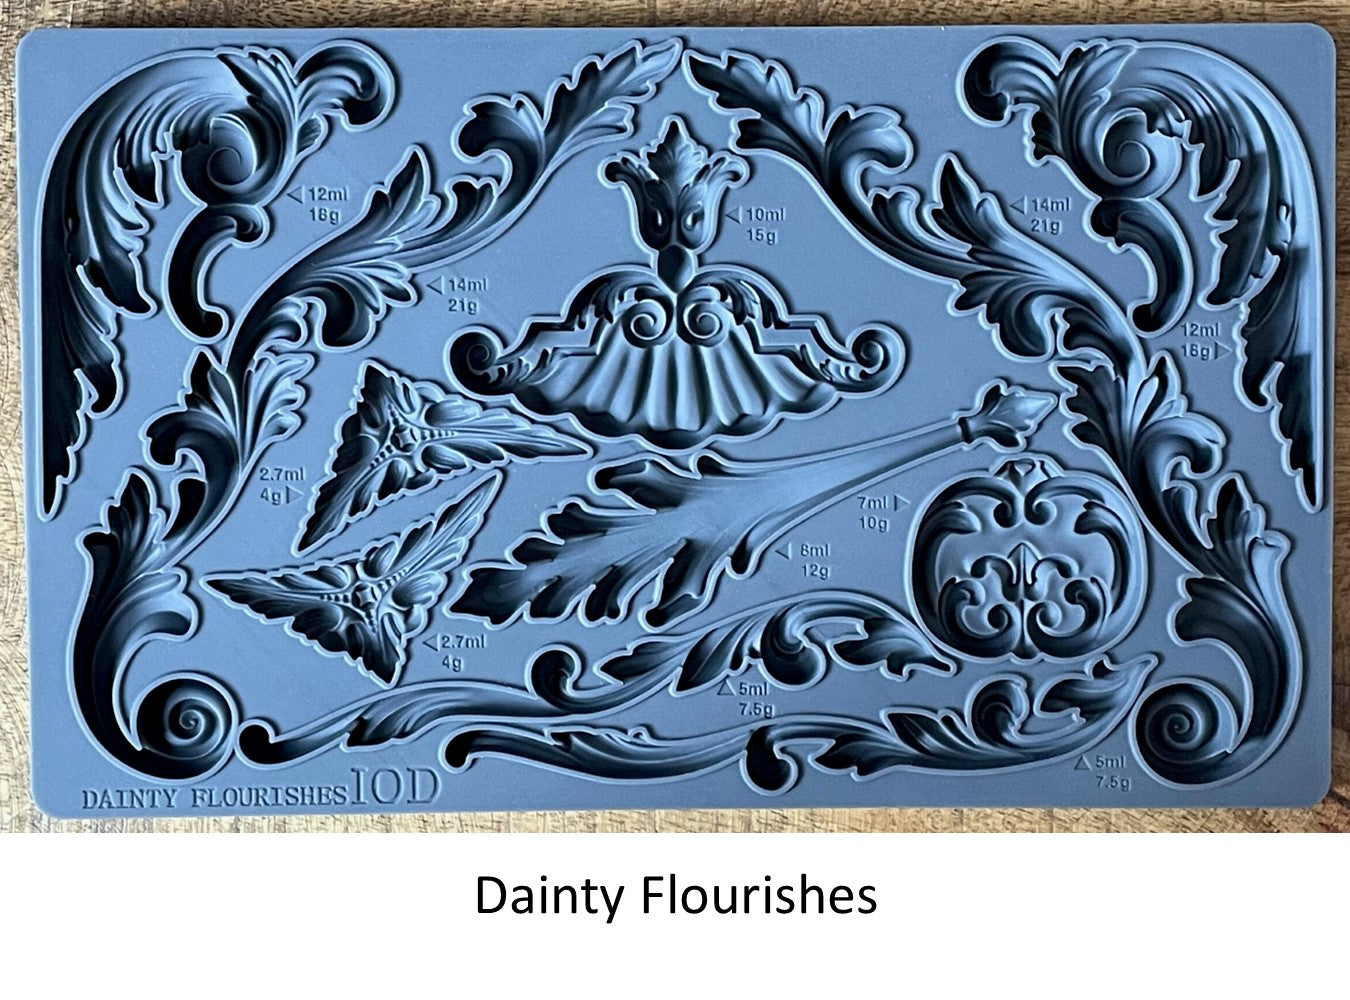 Acanthus Scroll - IOD Molds by Iron Orchid Designs  Iron orchid designs,  Acanthus, Diy home decor projects